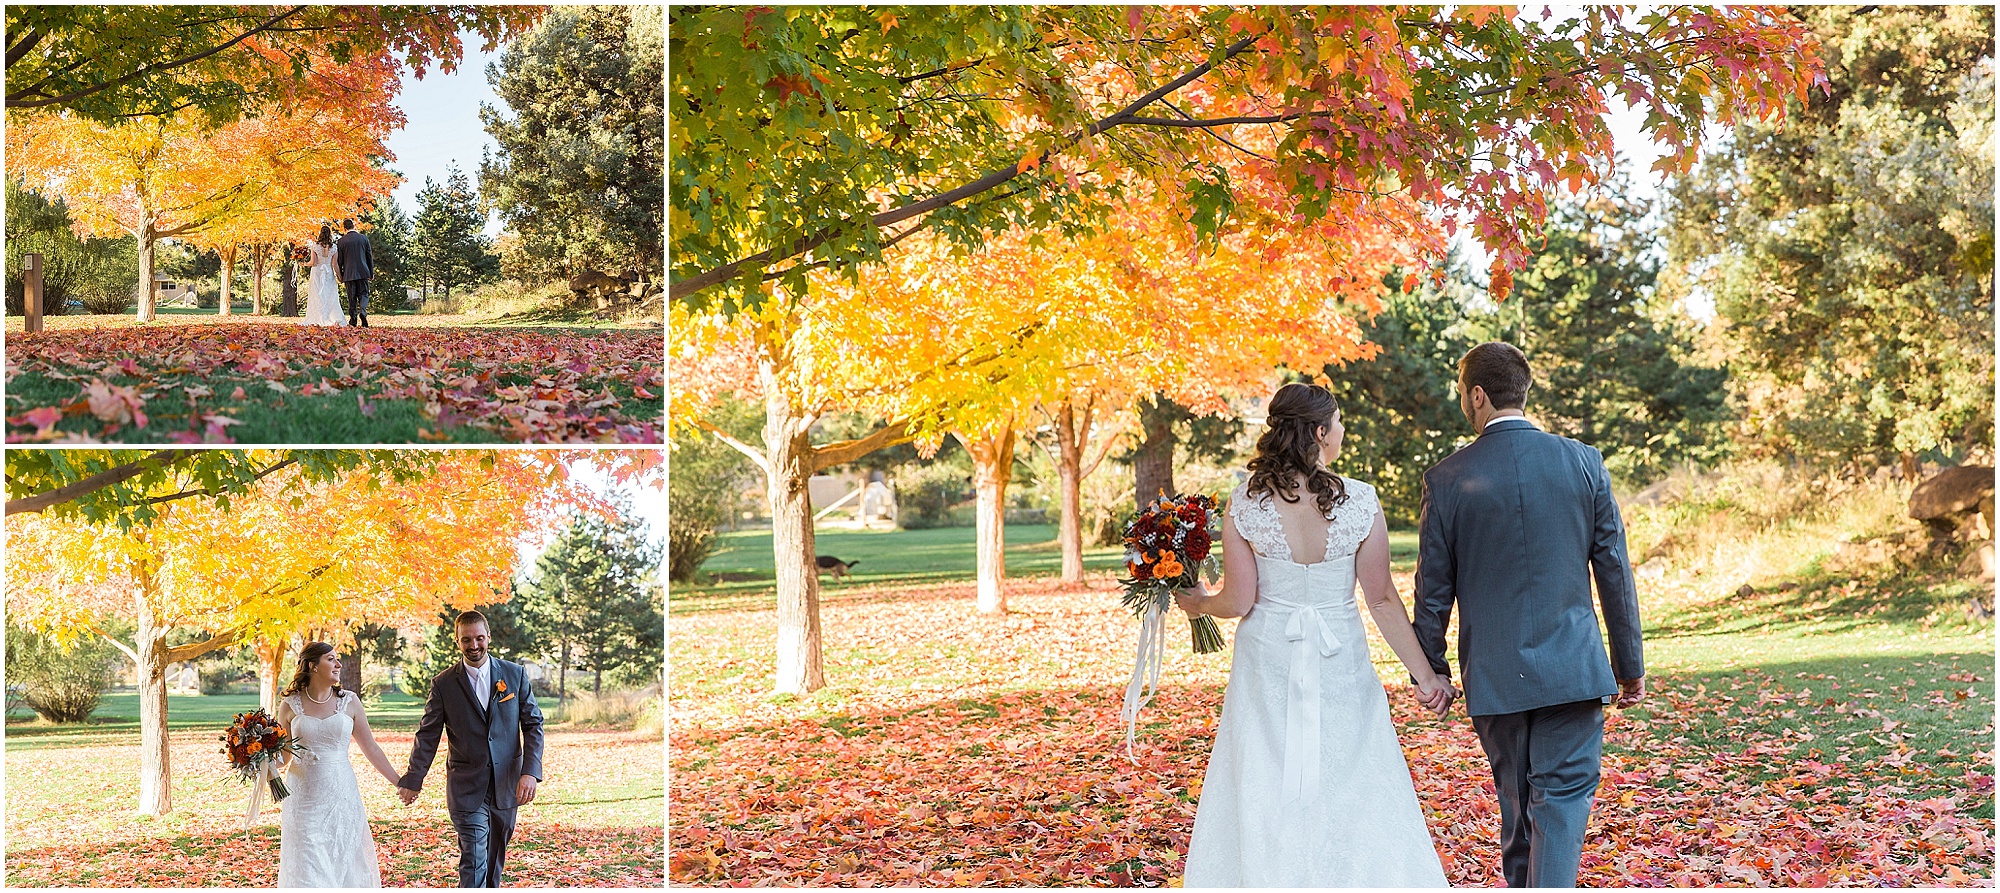 The fall color at Hollinshead Park is a gorgeous place for romantic portraits of your wedding day in Bend, OR. | Erica Swantek Photography